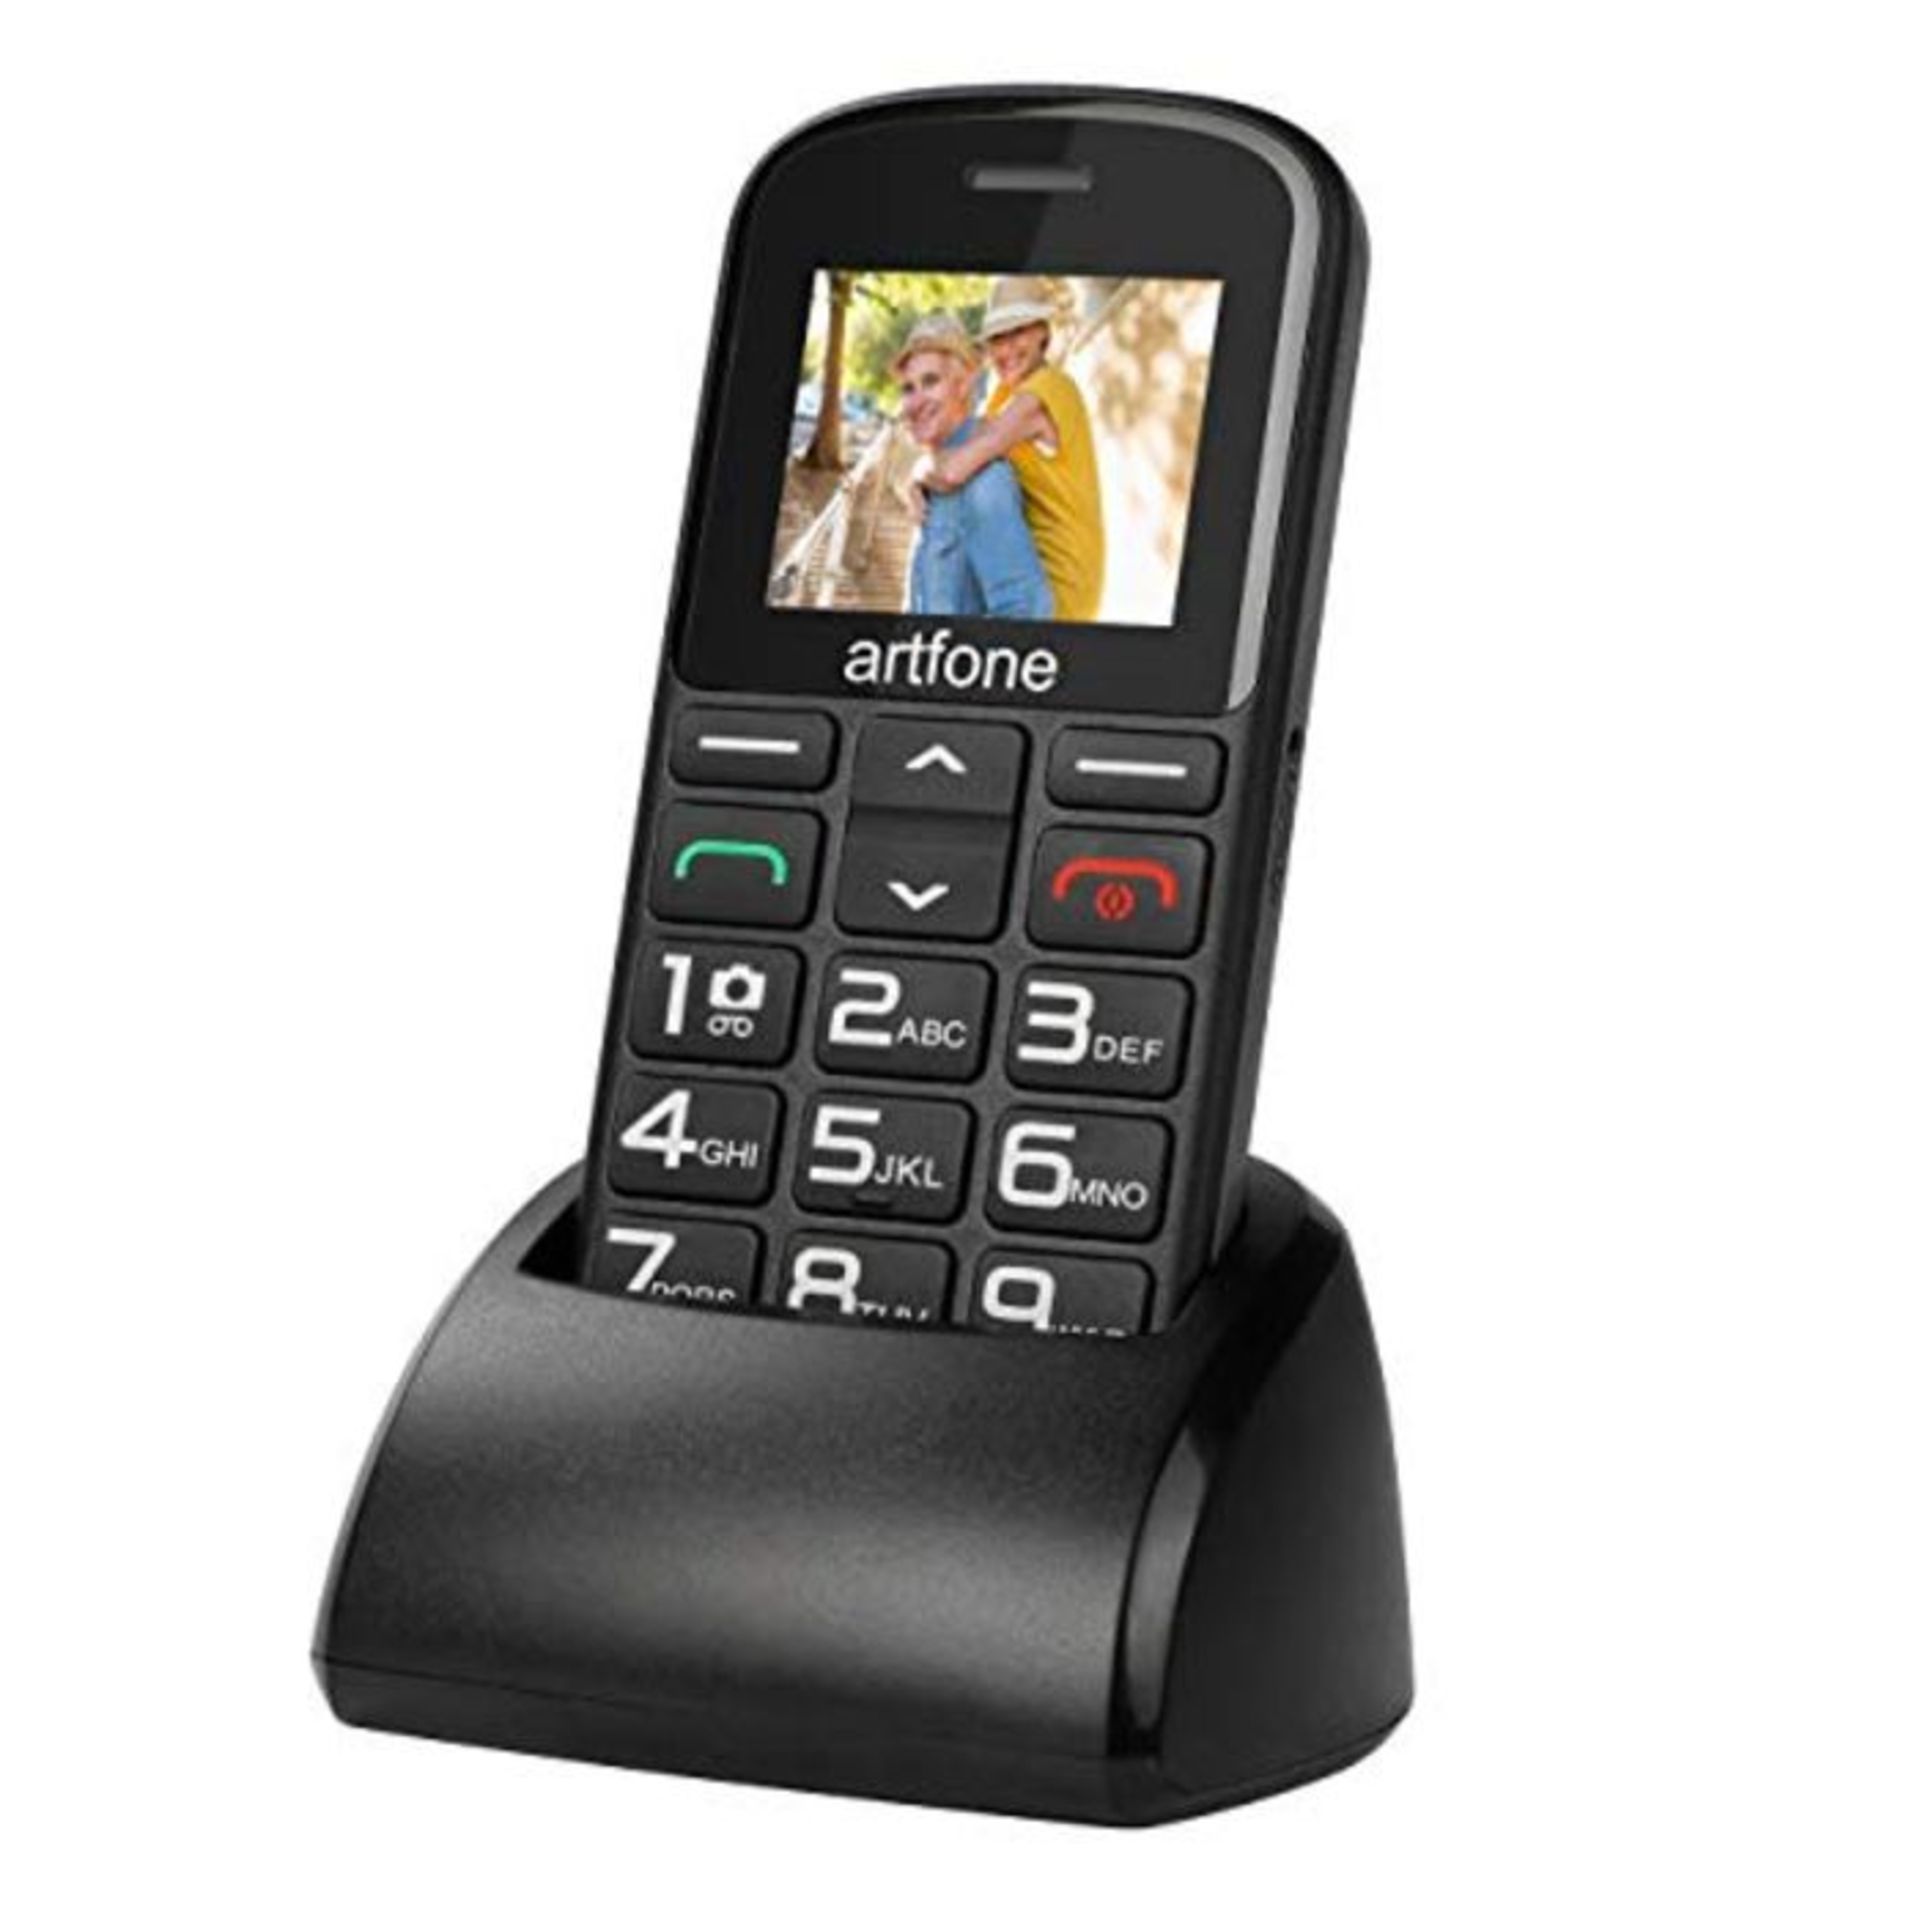 Mobile Phone for Elderly People, artfone 1400mAh Battery Big Button Mobile Phones Dual